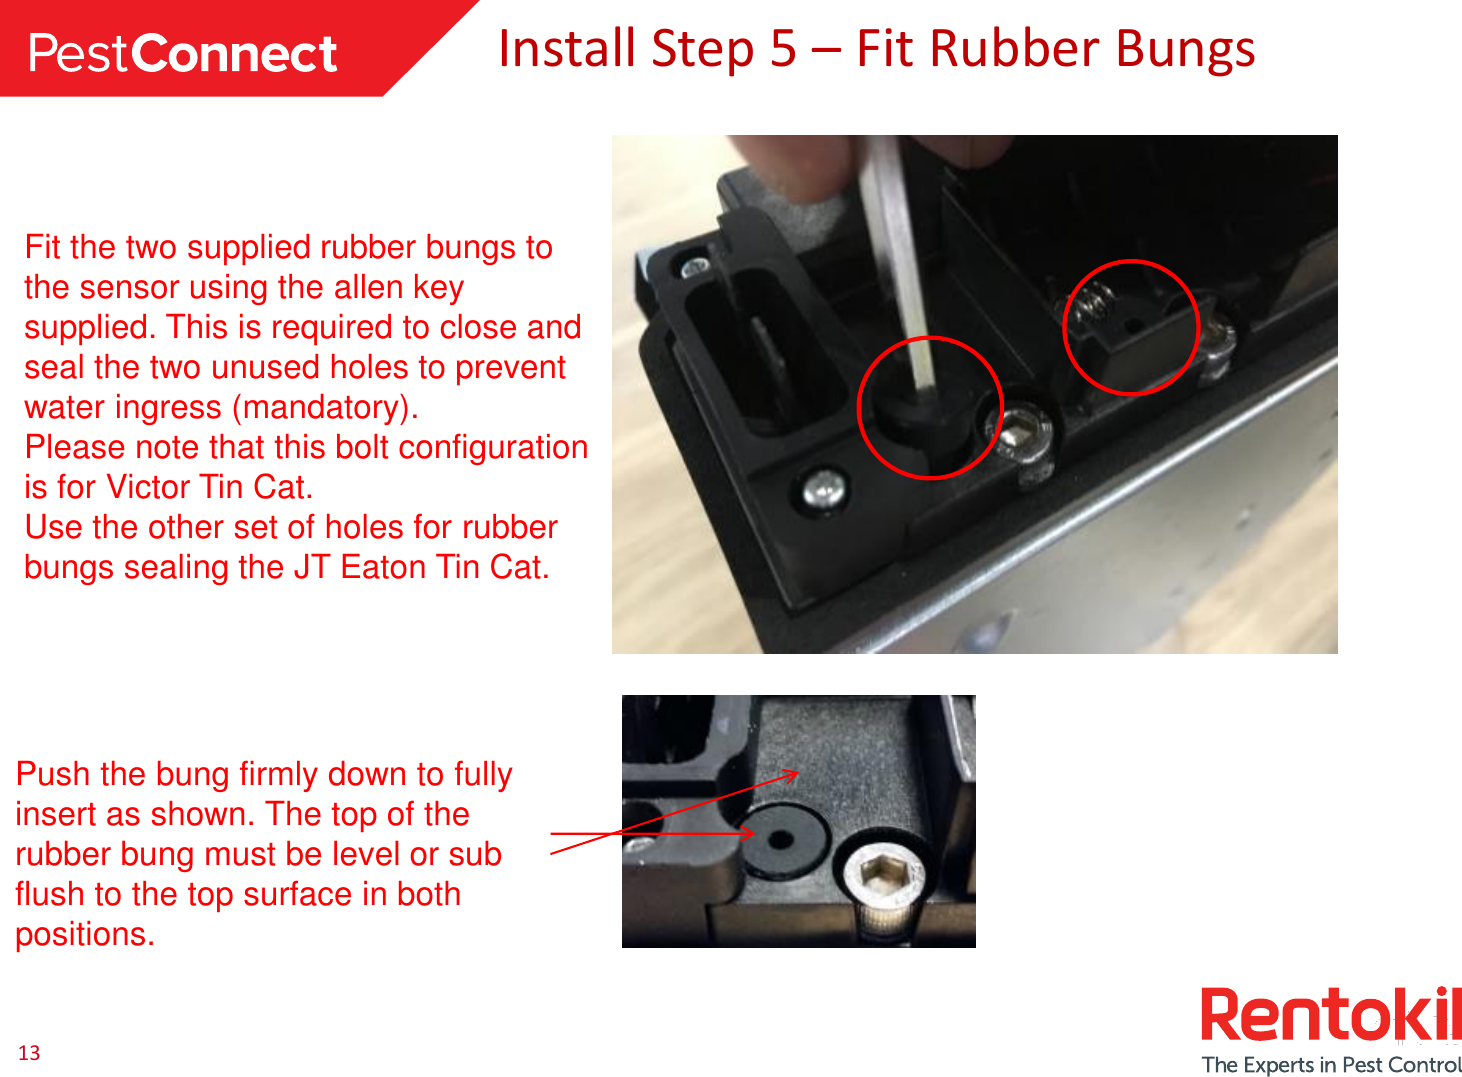 13Install Step 5 –Fit Rubber BungsFit the two supplied rubber bungs to the sensor using the allen key supplied. This is required to close and seal the two unused holes to prevent water ingress (mandatory).Please note that this bolt configuration is for Victor Tin Cat.Use the other set of holes for rubber bungs sealing the JT Eaton Tin Cat. Push the bung firmly down to fully insert as shown. The top of the rubber bung must be level or sub flush to the top surface in both positions.